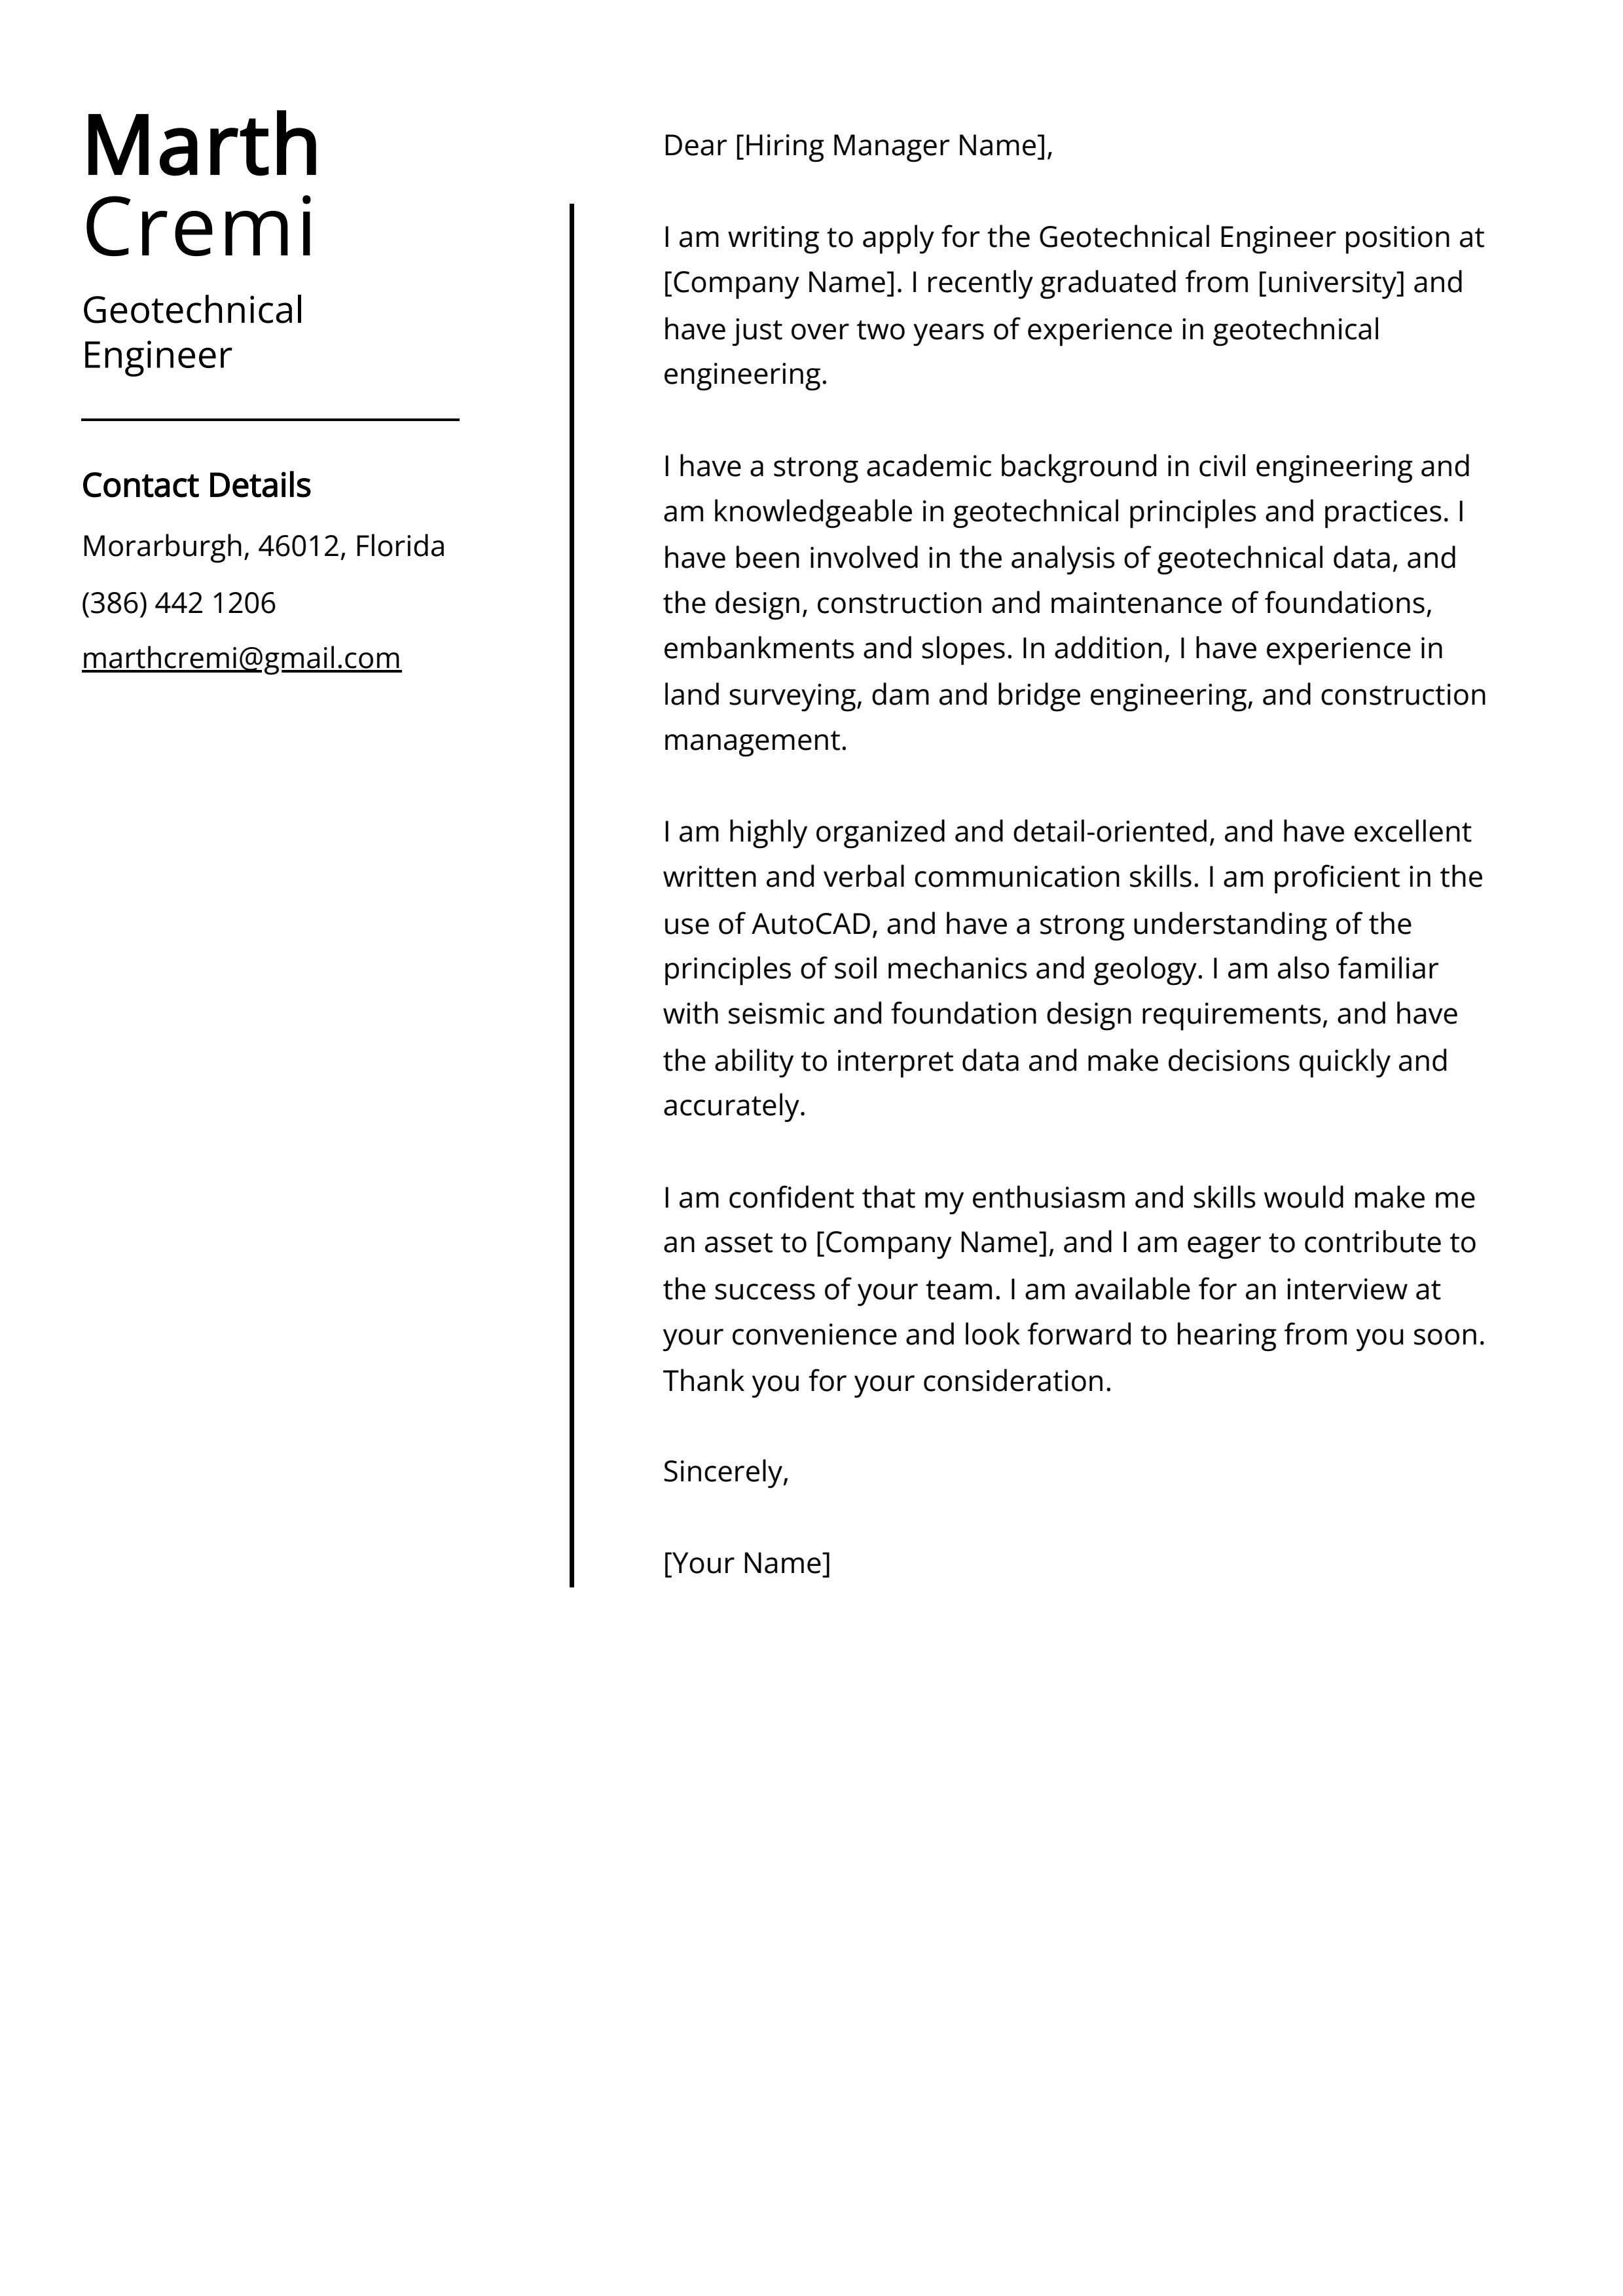 Geotechnical Engineer Cover Letter Example